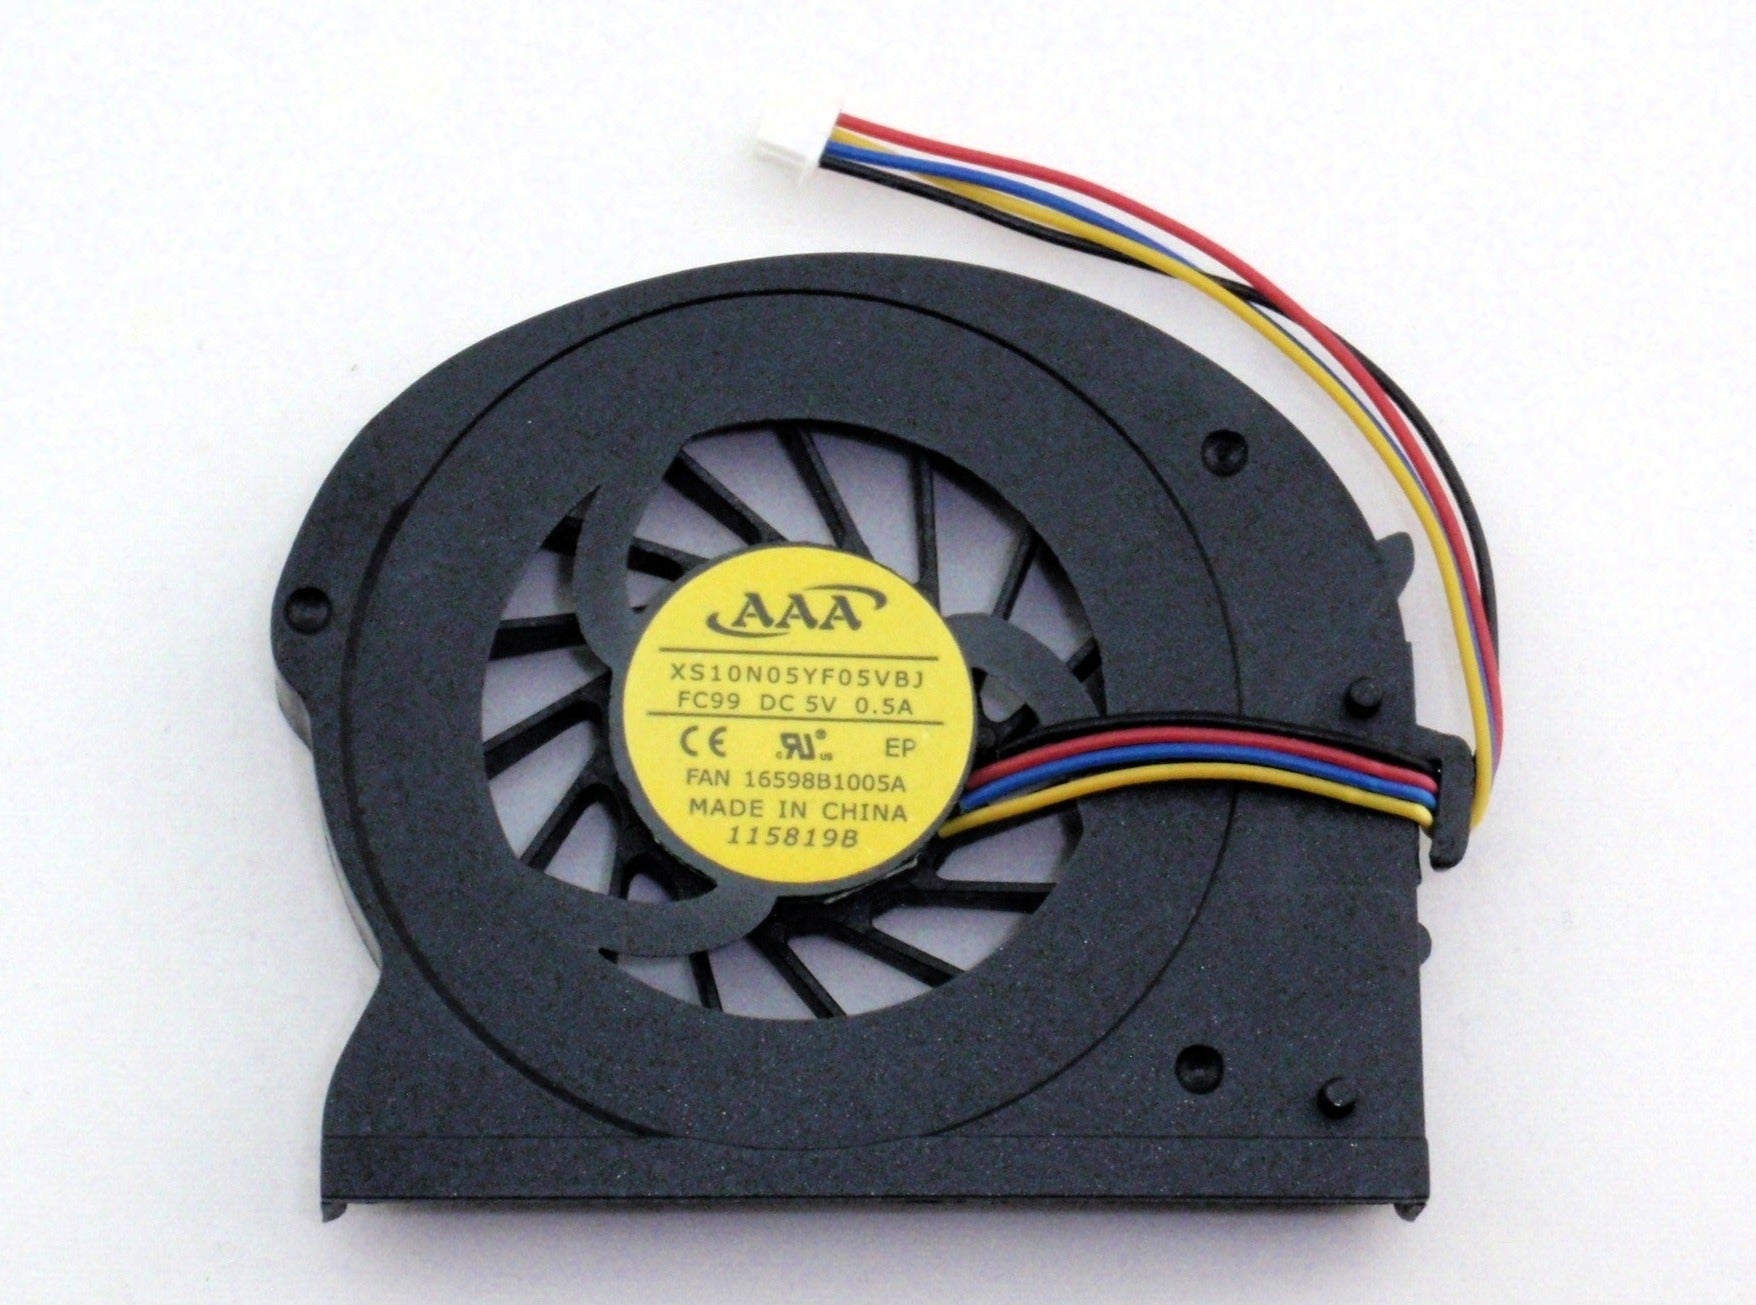 Lenovo New CPU Thermal Cooling Fan 4-Wire IdeaPad Z360 Z360a AB5005UX-R03